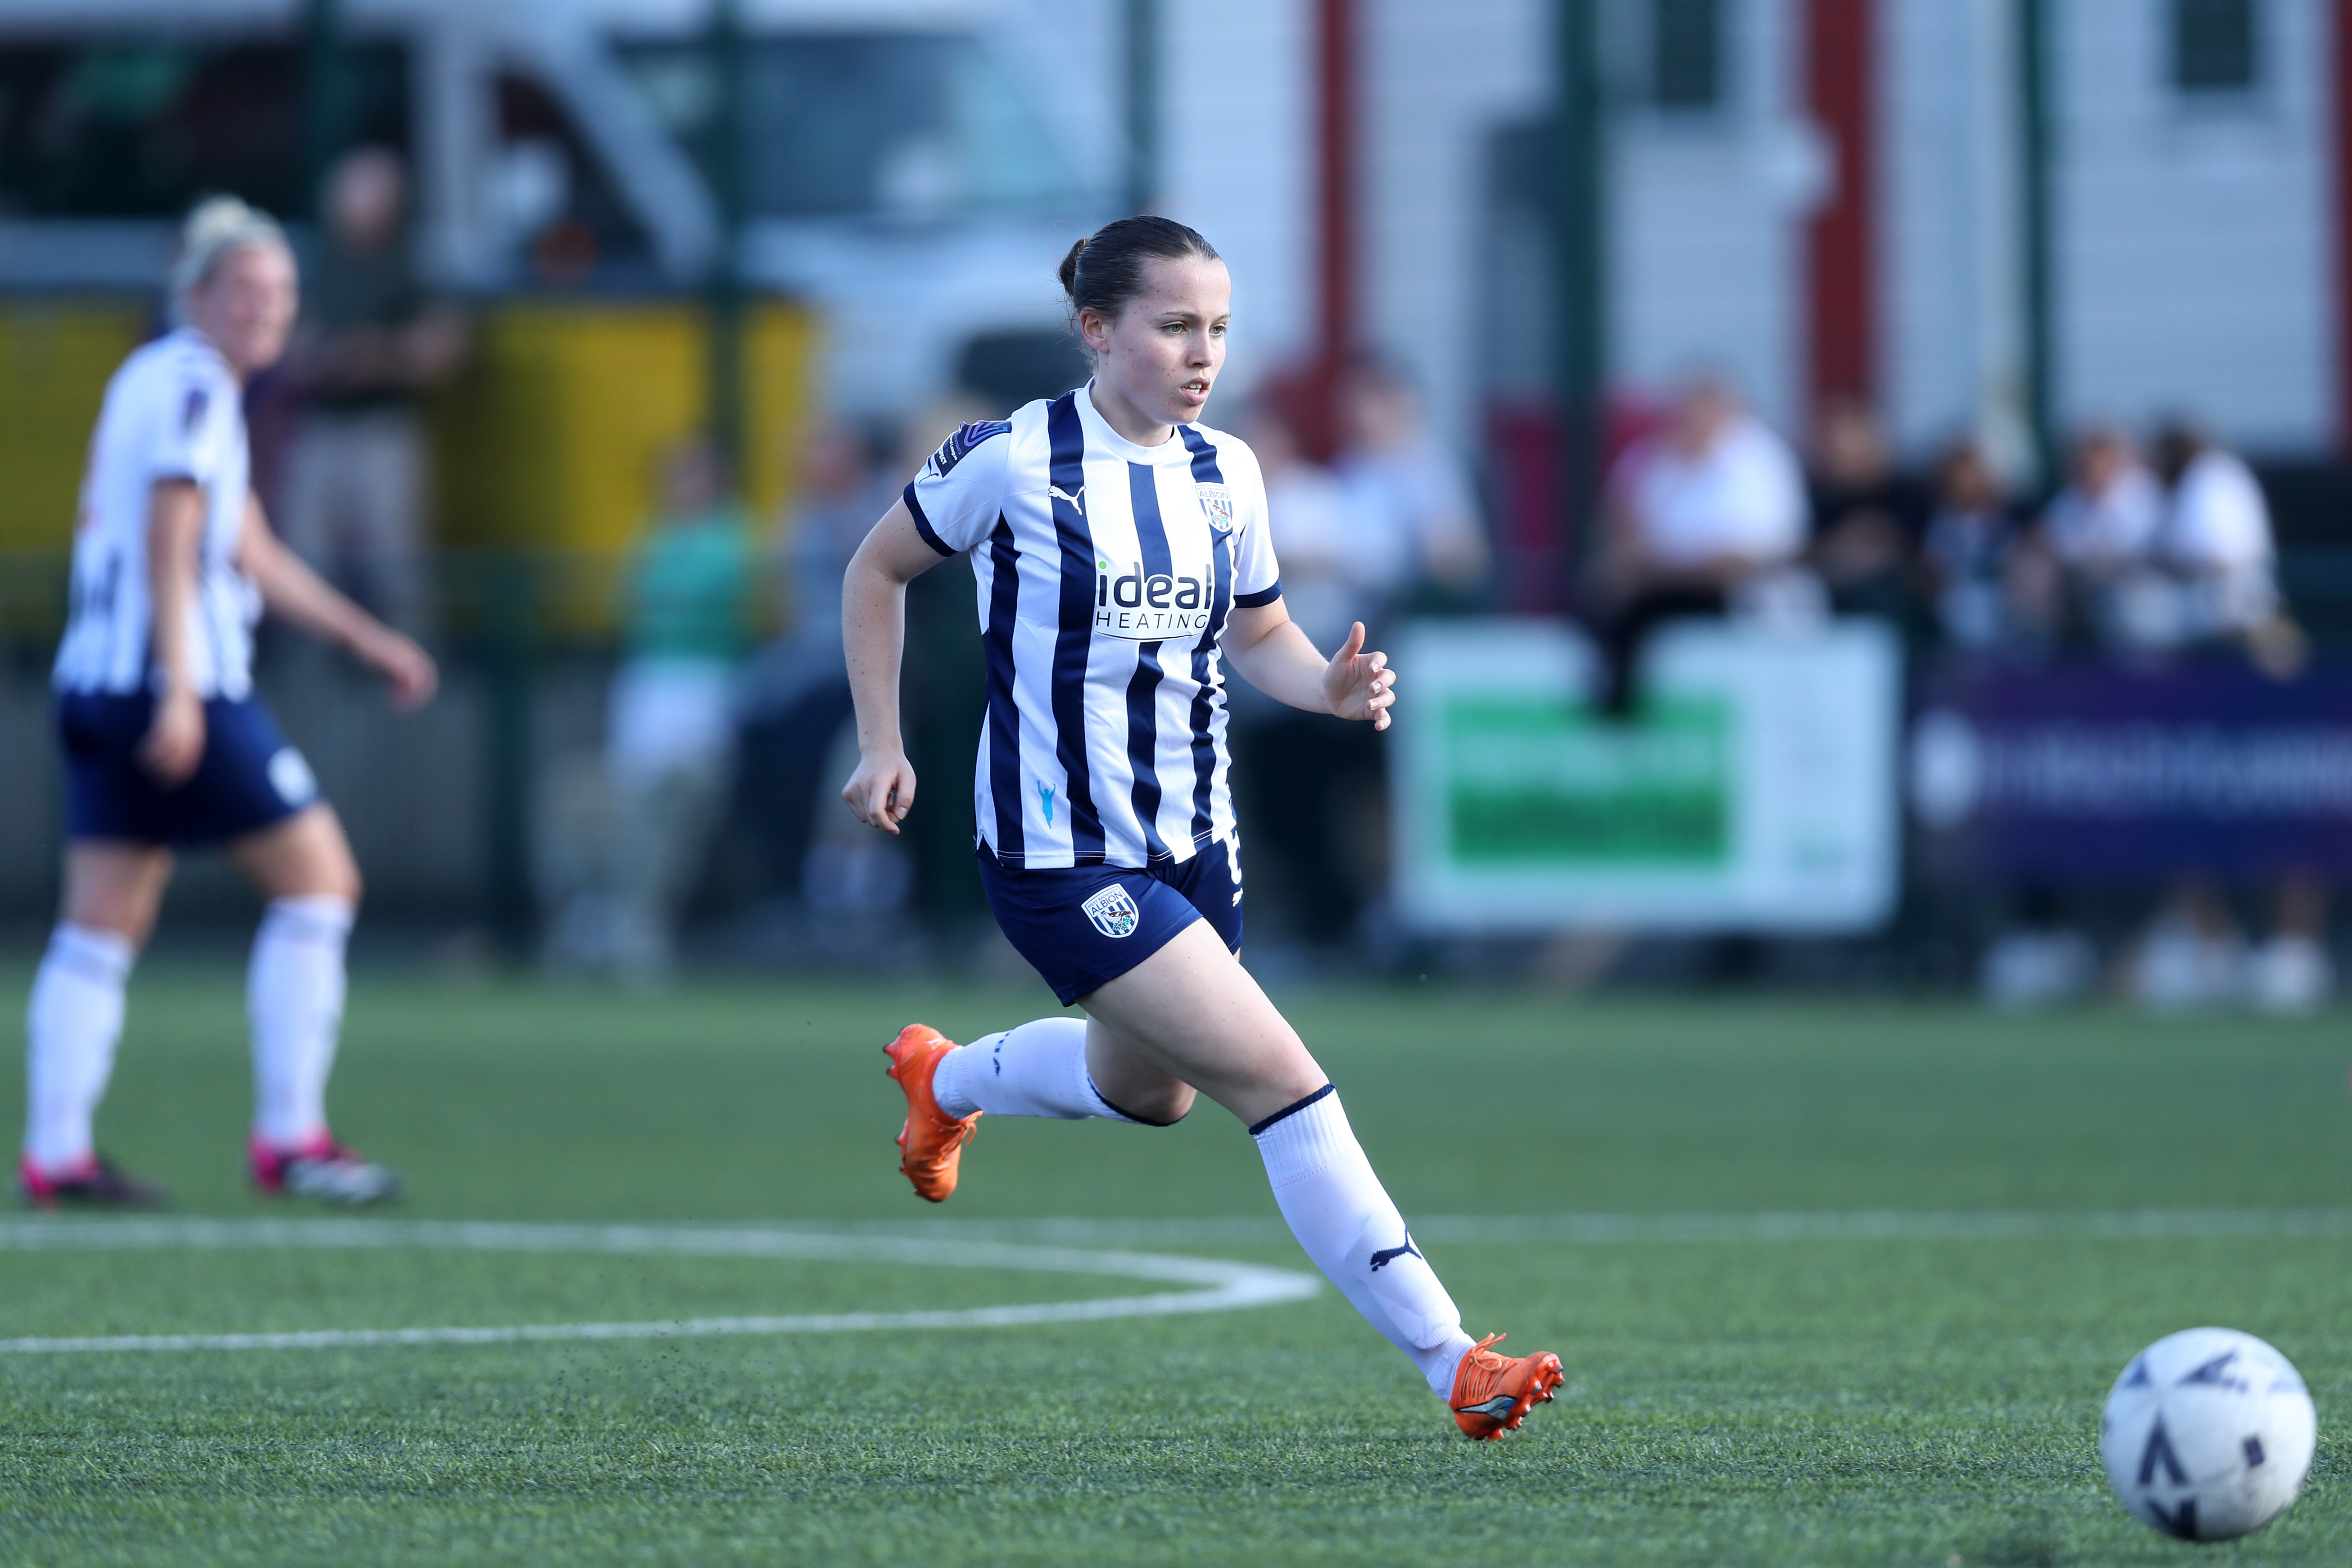 Abi Loydon in action for Albion Women wearing the home kit 